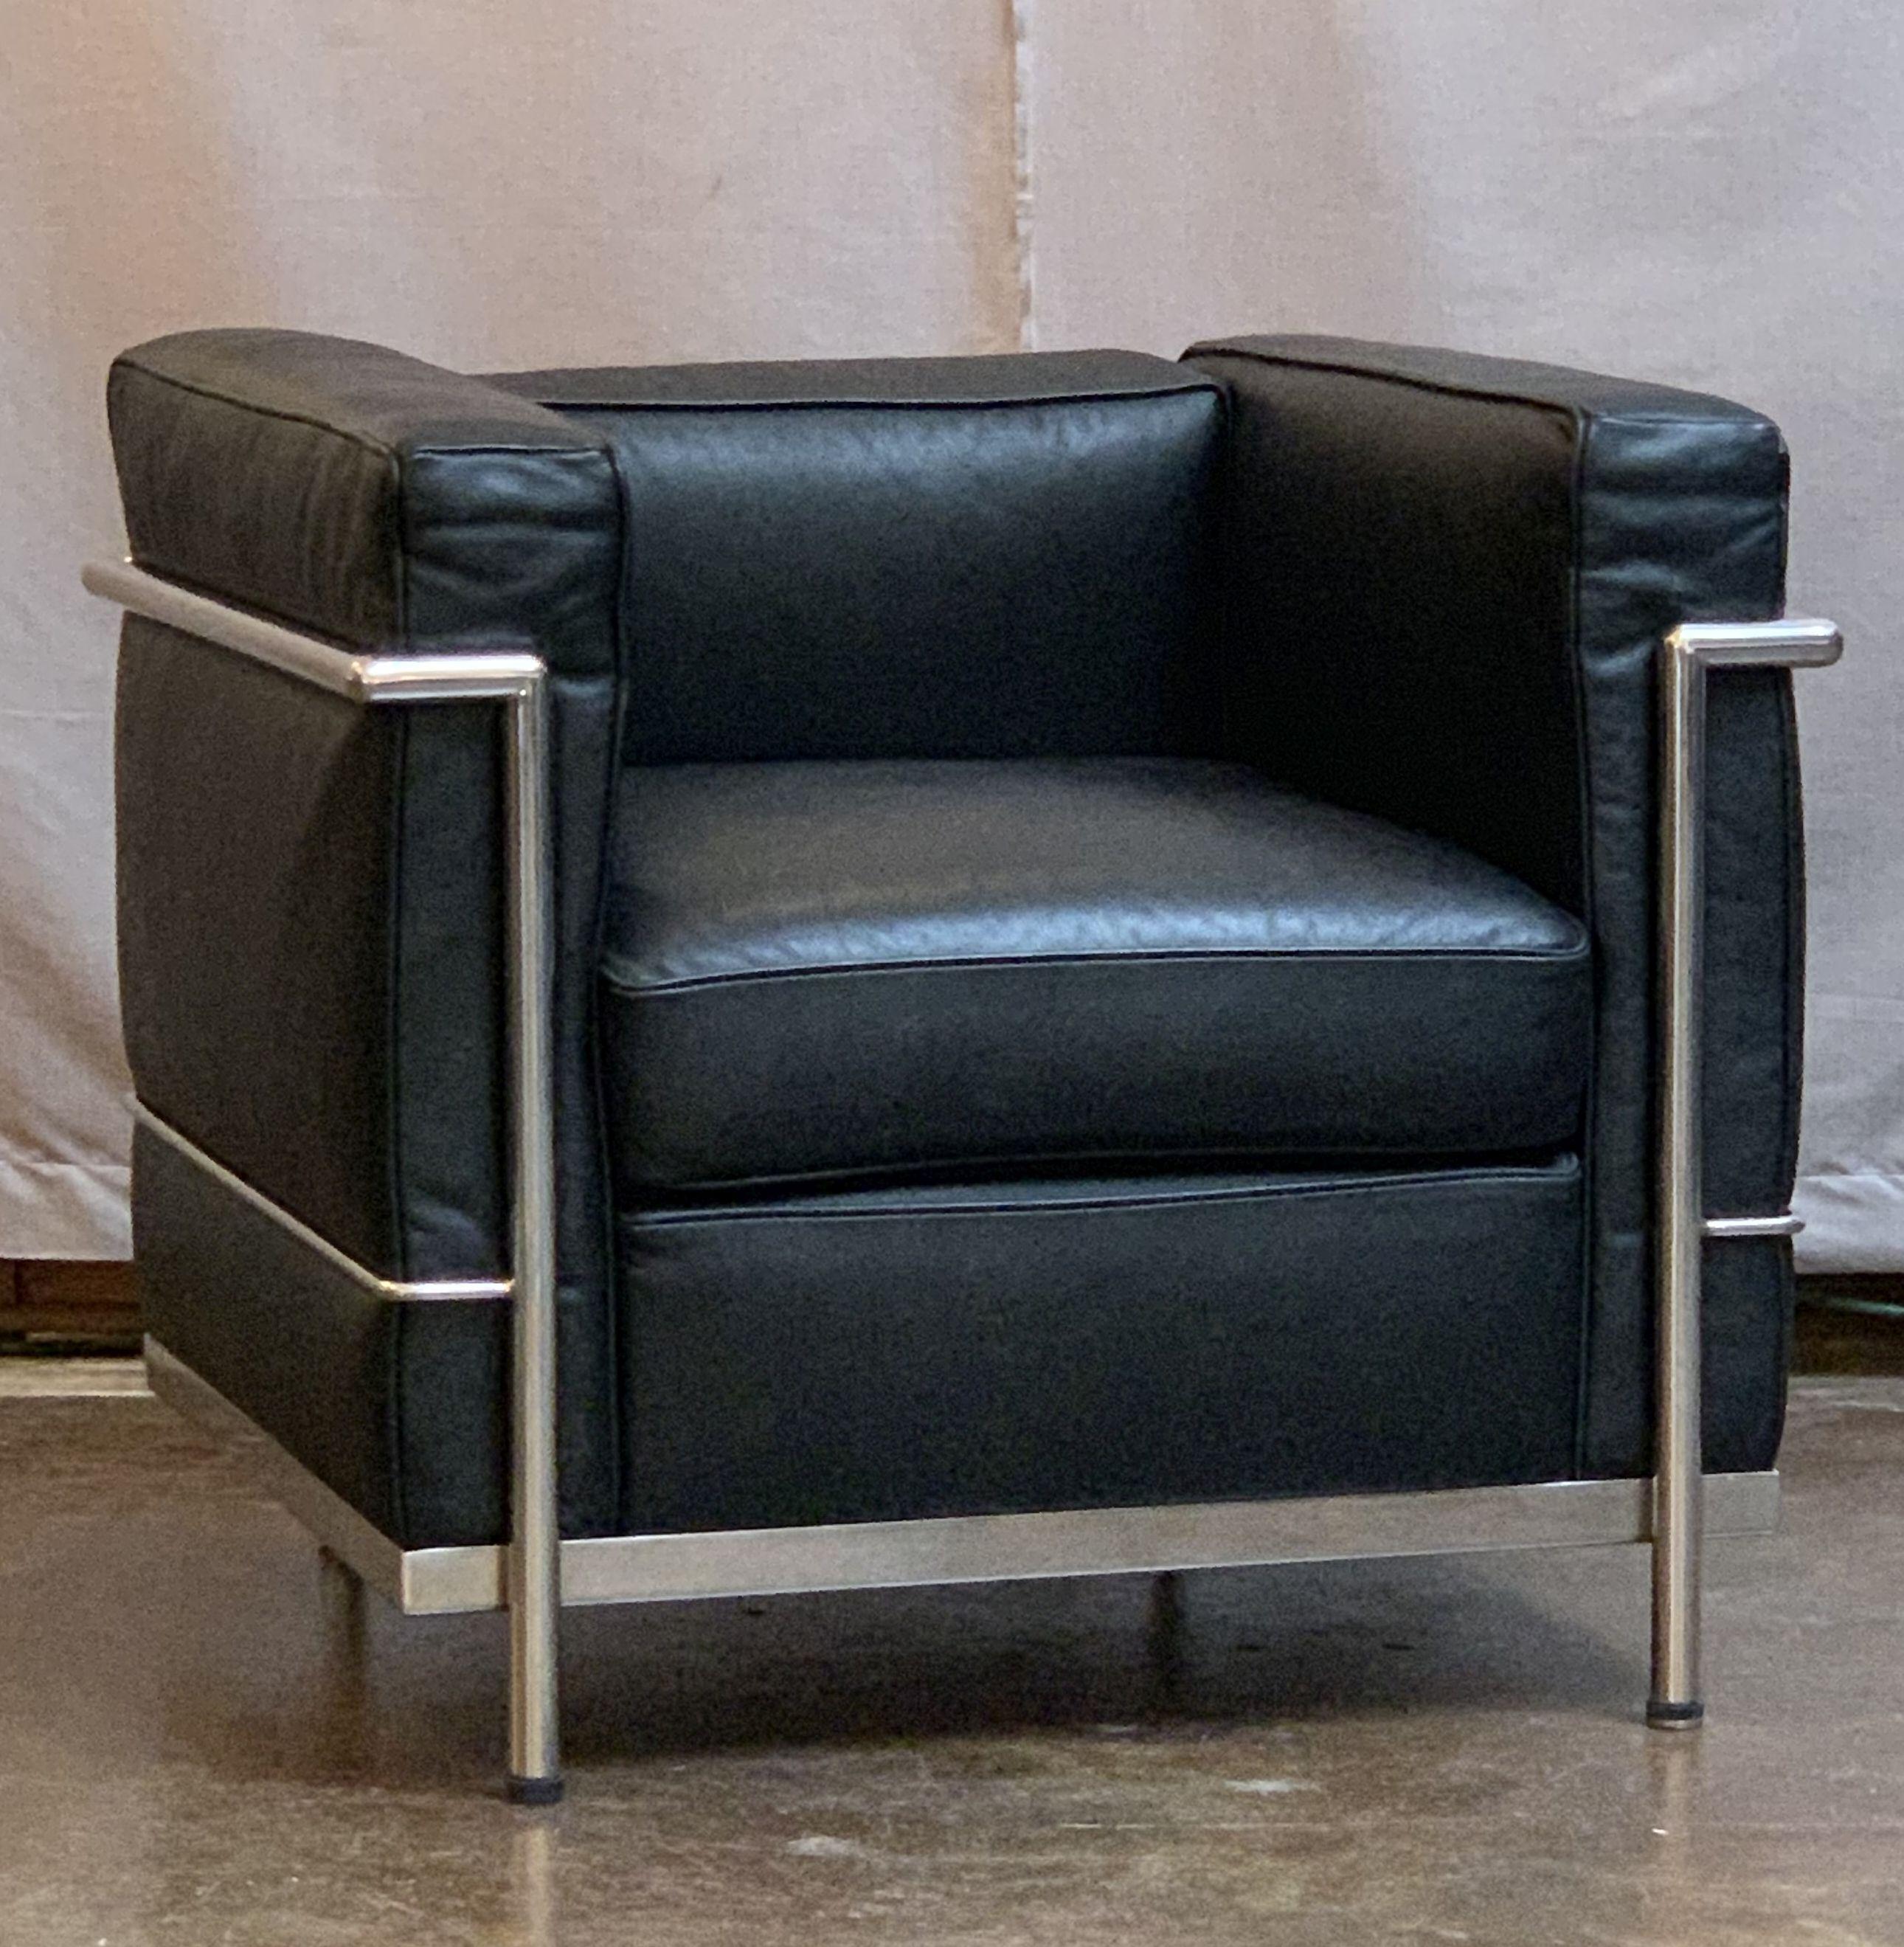 A pair of vintage black leather chairs, each featuring the stylish chrome frame and black leather upholstered cushions made famous by Le Corbusier, Pierre Jeanneret and Charlotte Perriand in their work for Cassina. Each chair offers comfortable